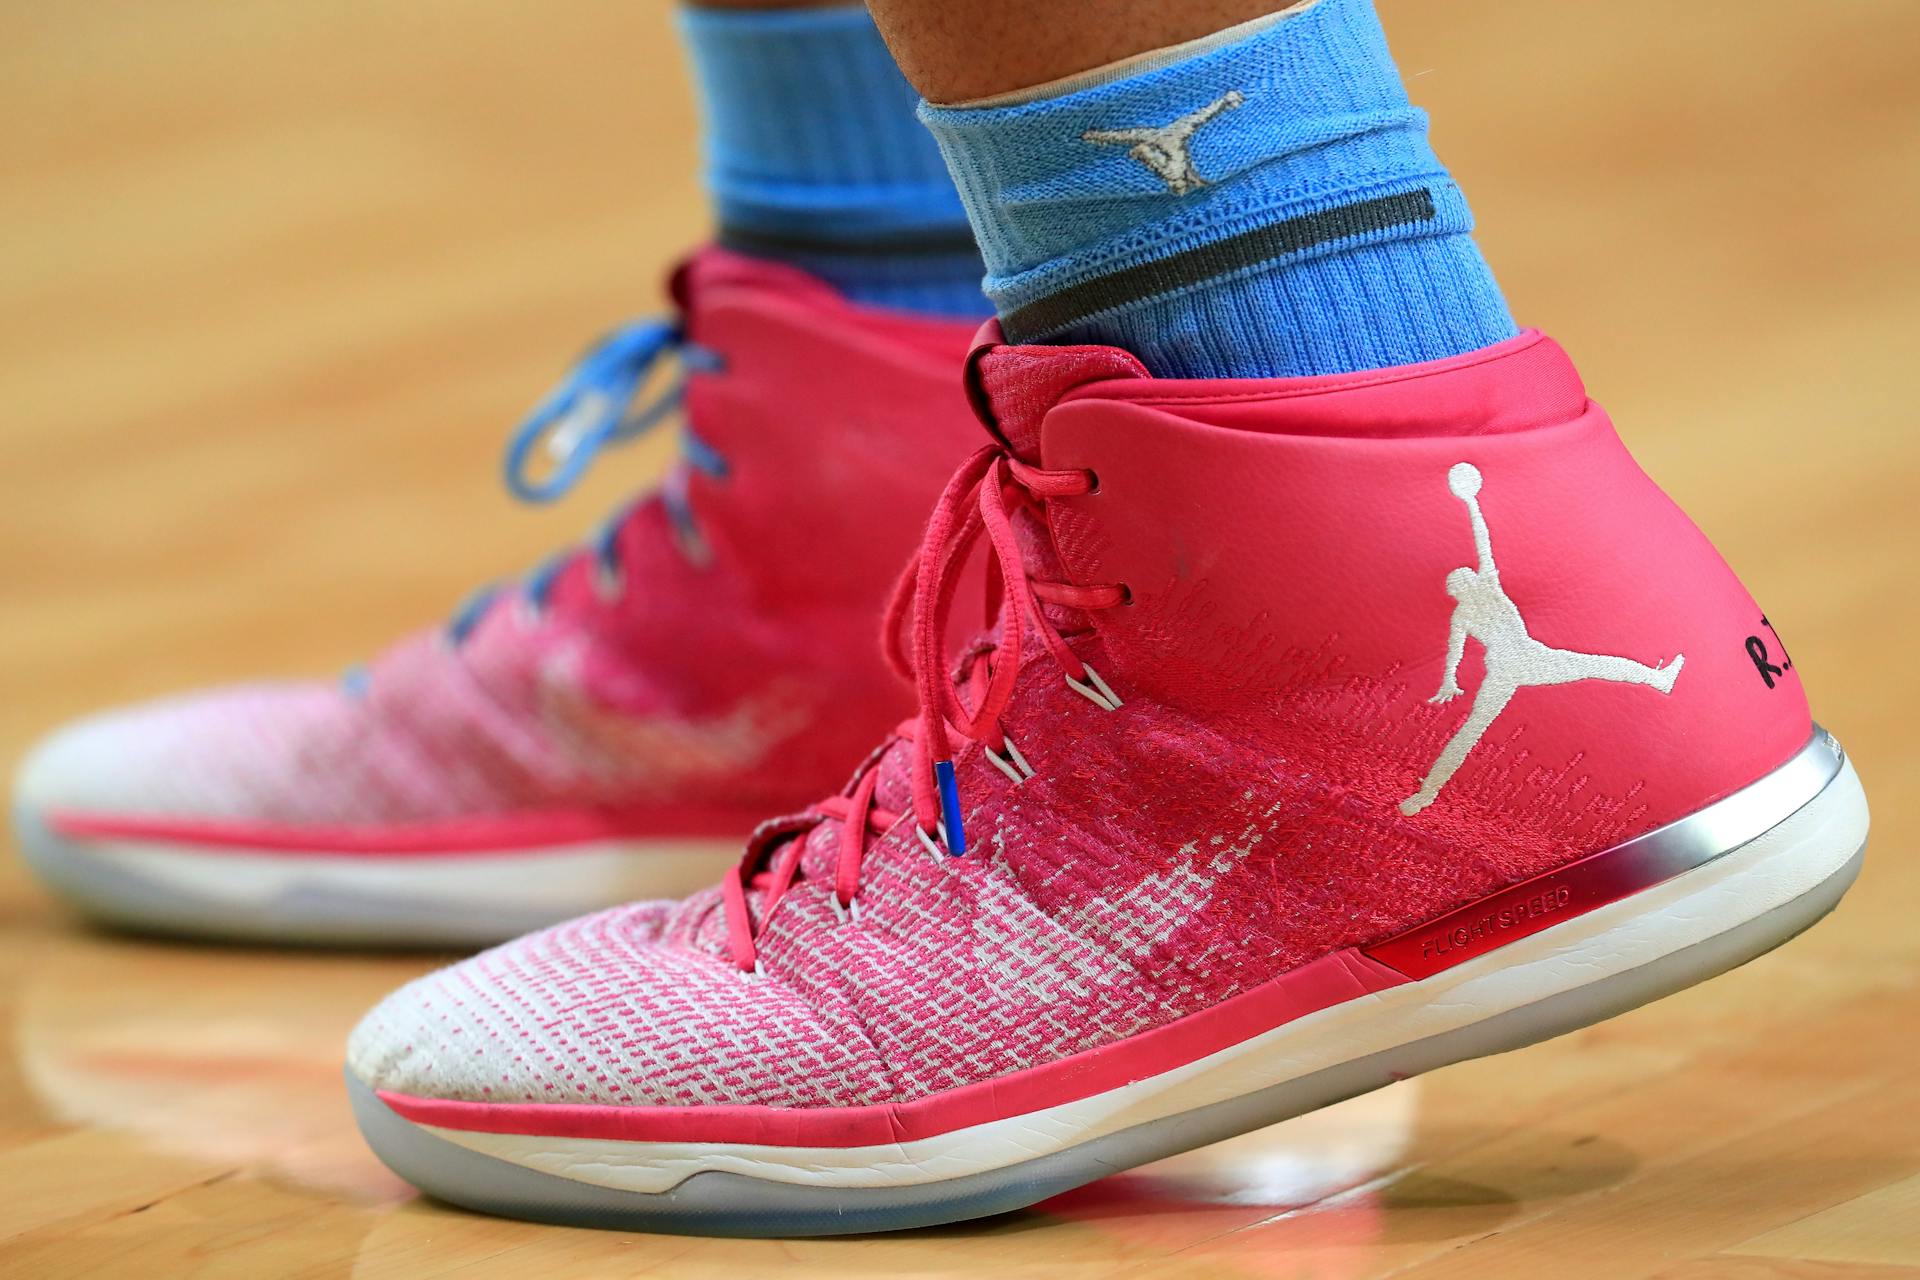 Detail of the Air Jordan Nike shoes worn by Chicago Bulls' center News  Photo - Getty Images